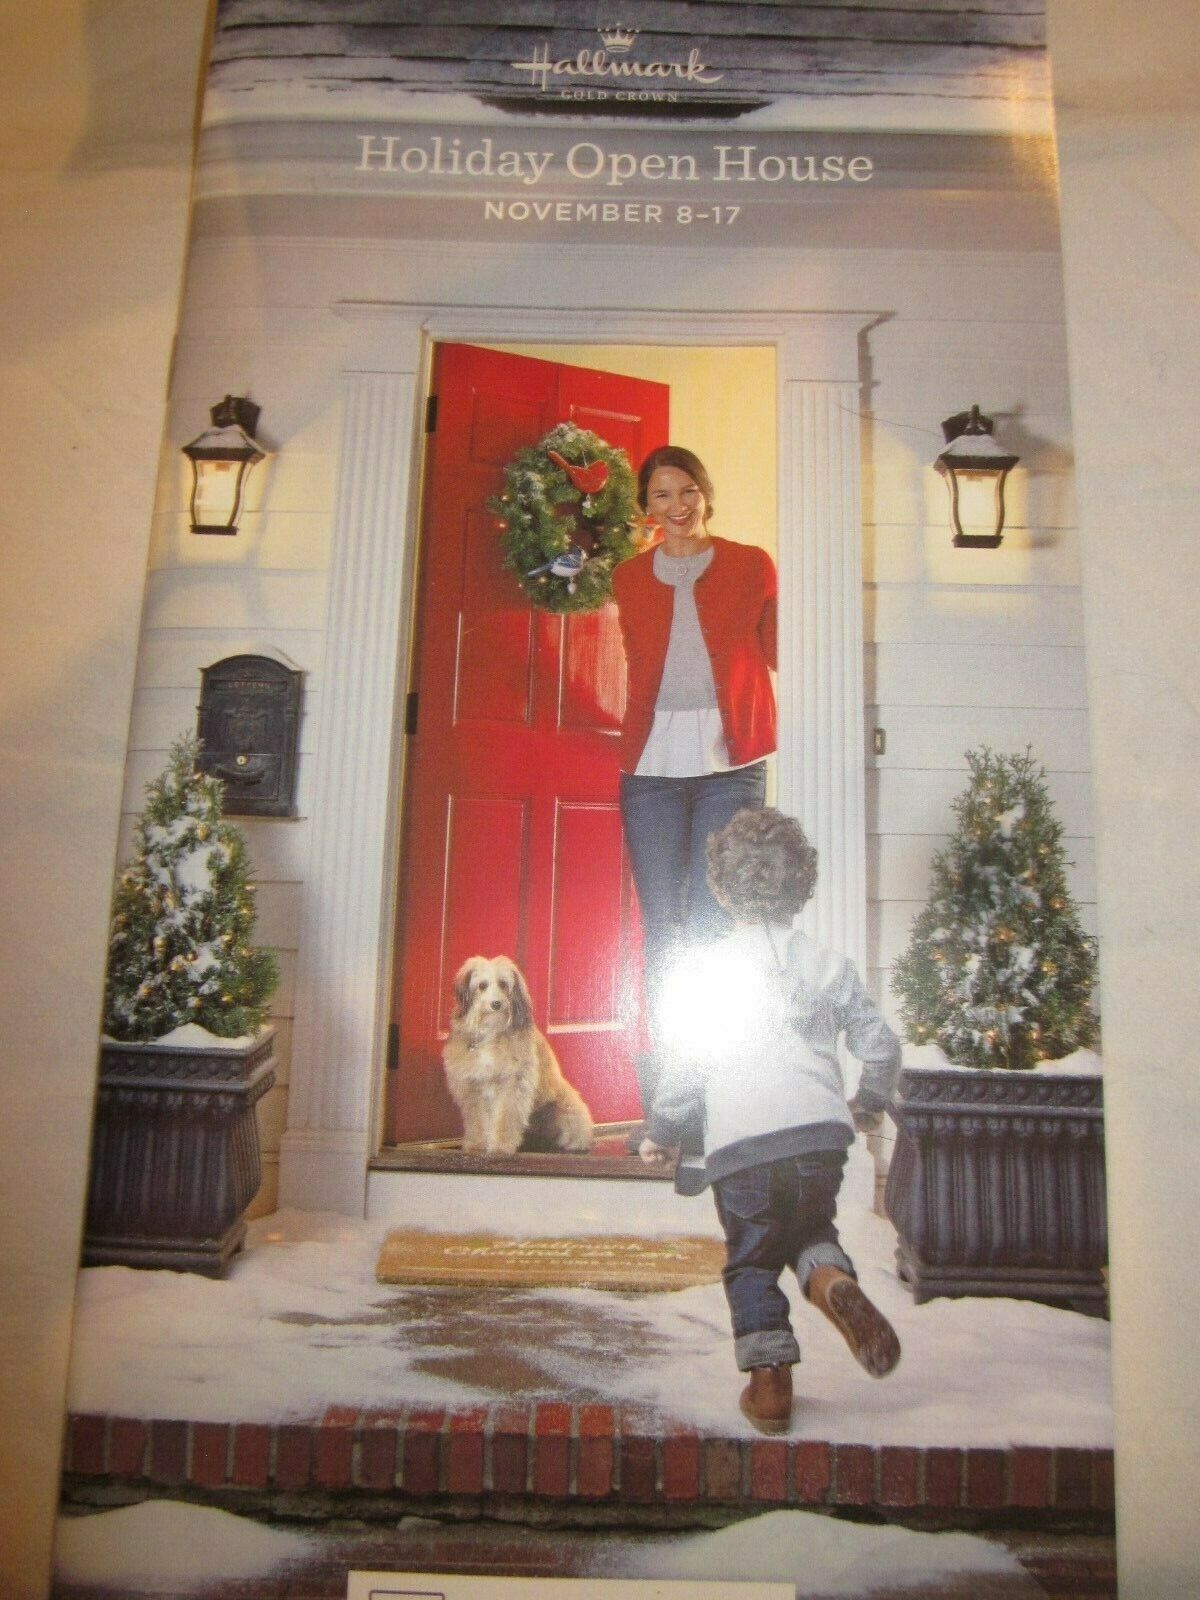 Hallmark Gold Crown Holiday Open House Mailer 2019 Brand New - $4.99